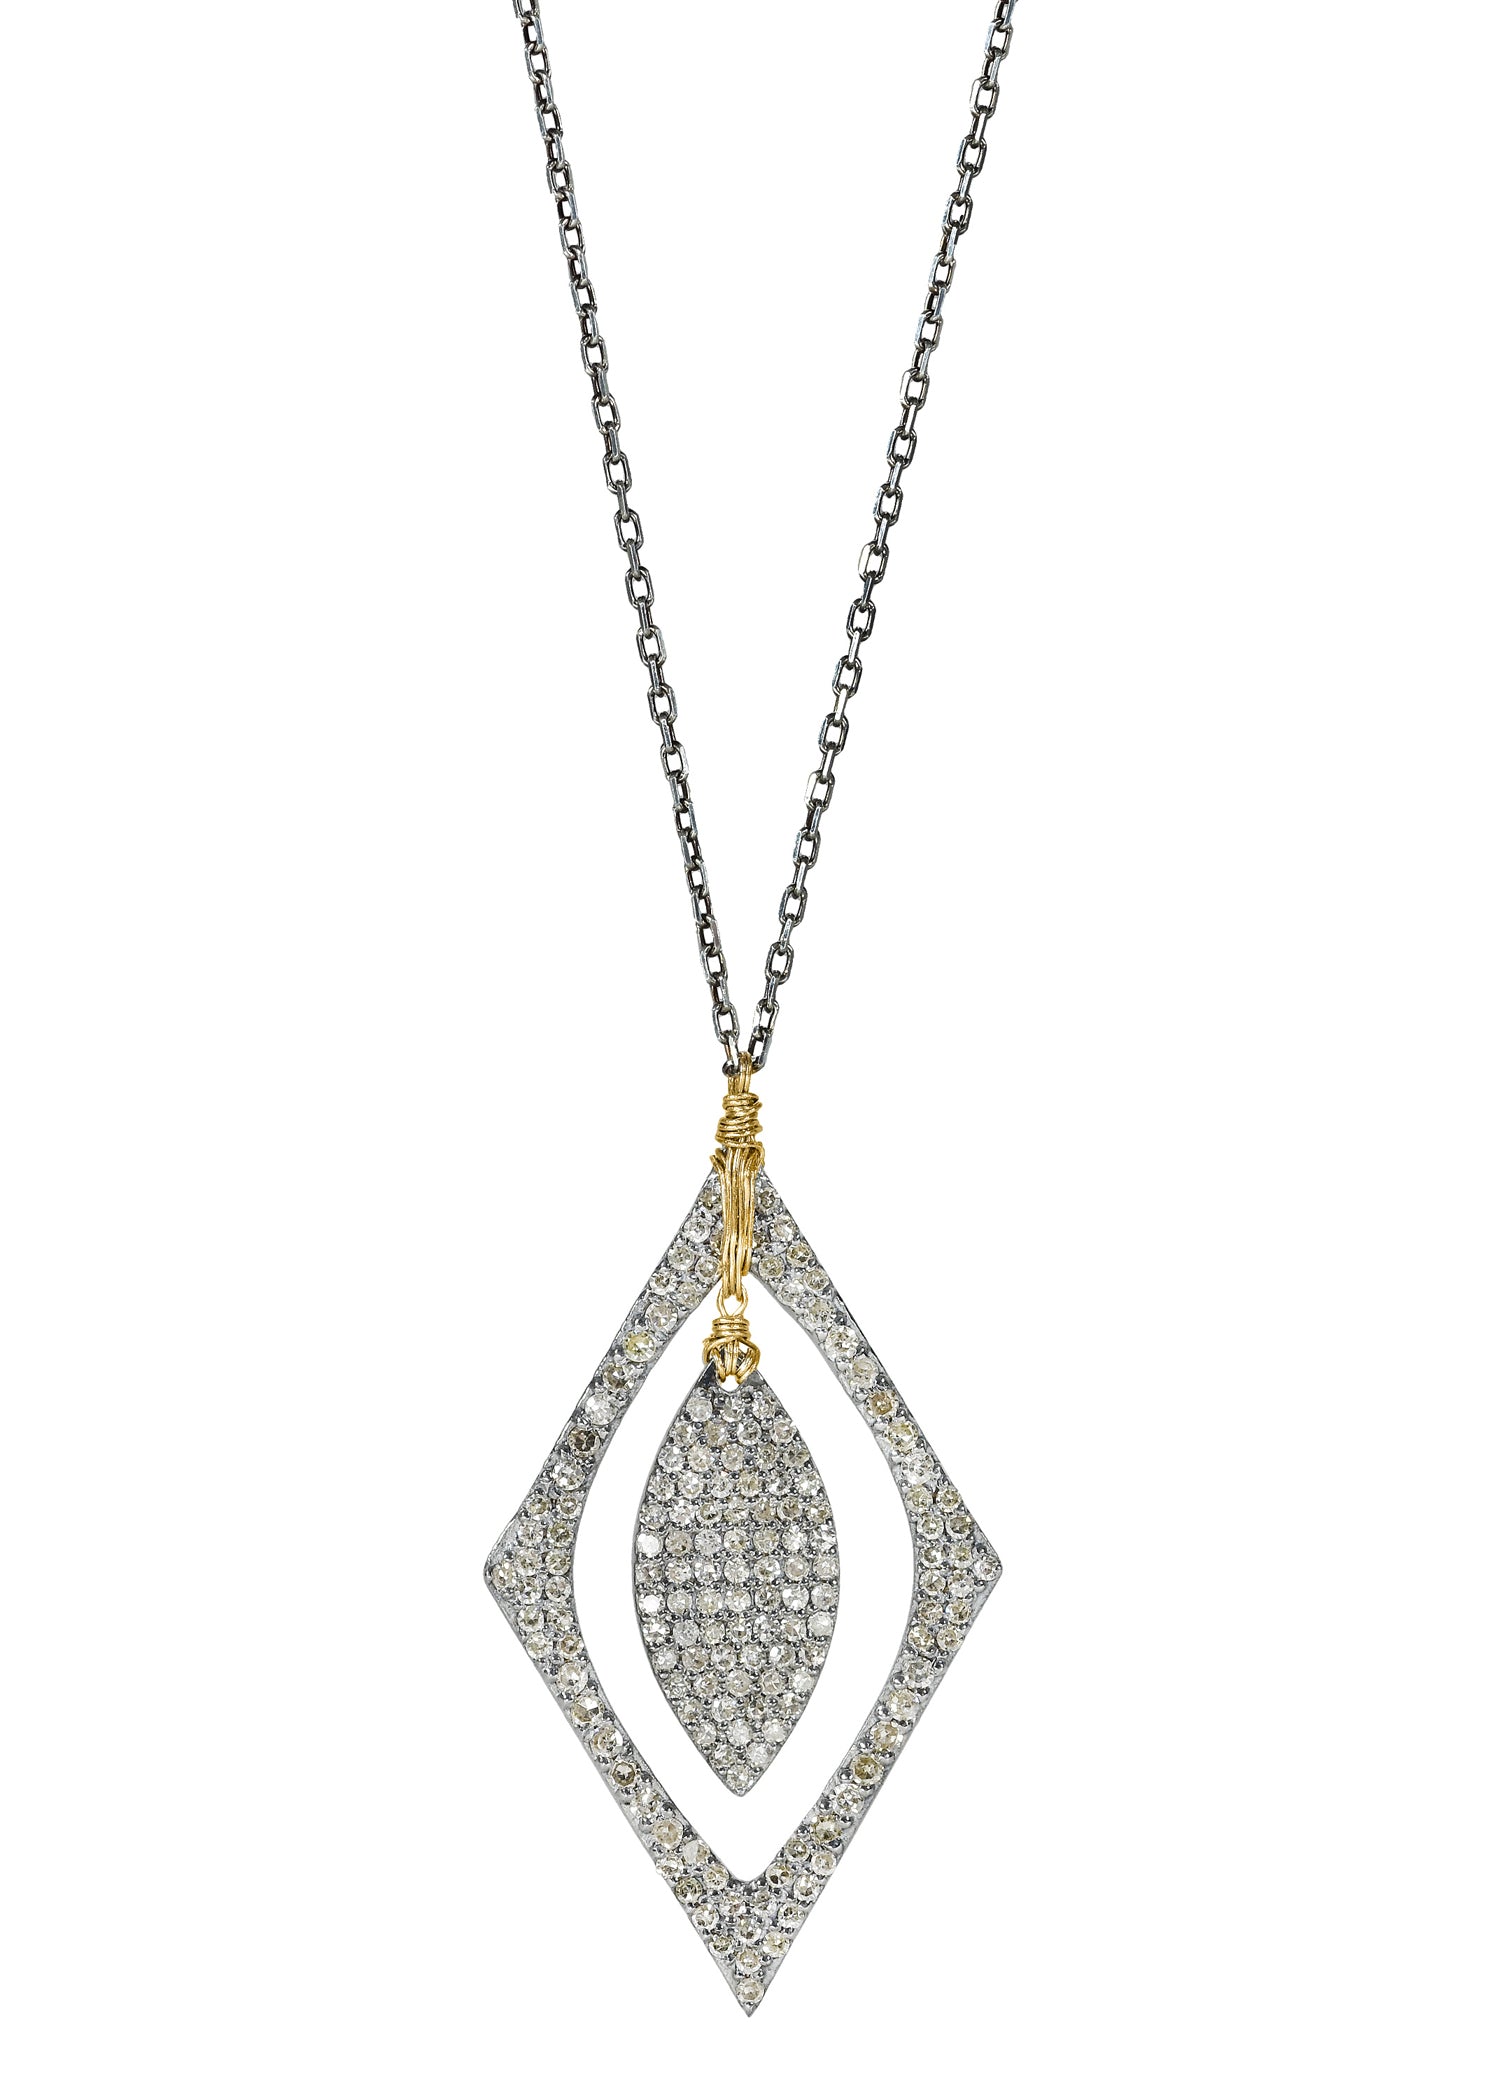 Diamond 14k gold Sterling silver Mixed metal Necklace measures 17" in length Pendant measures 1-1/2" in length and 7/8" in width at the widest point Handmade in our Los Angeles studio